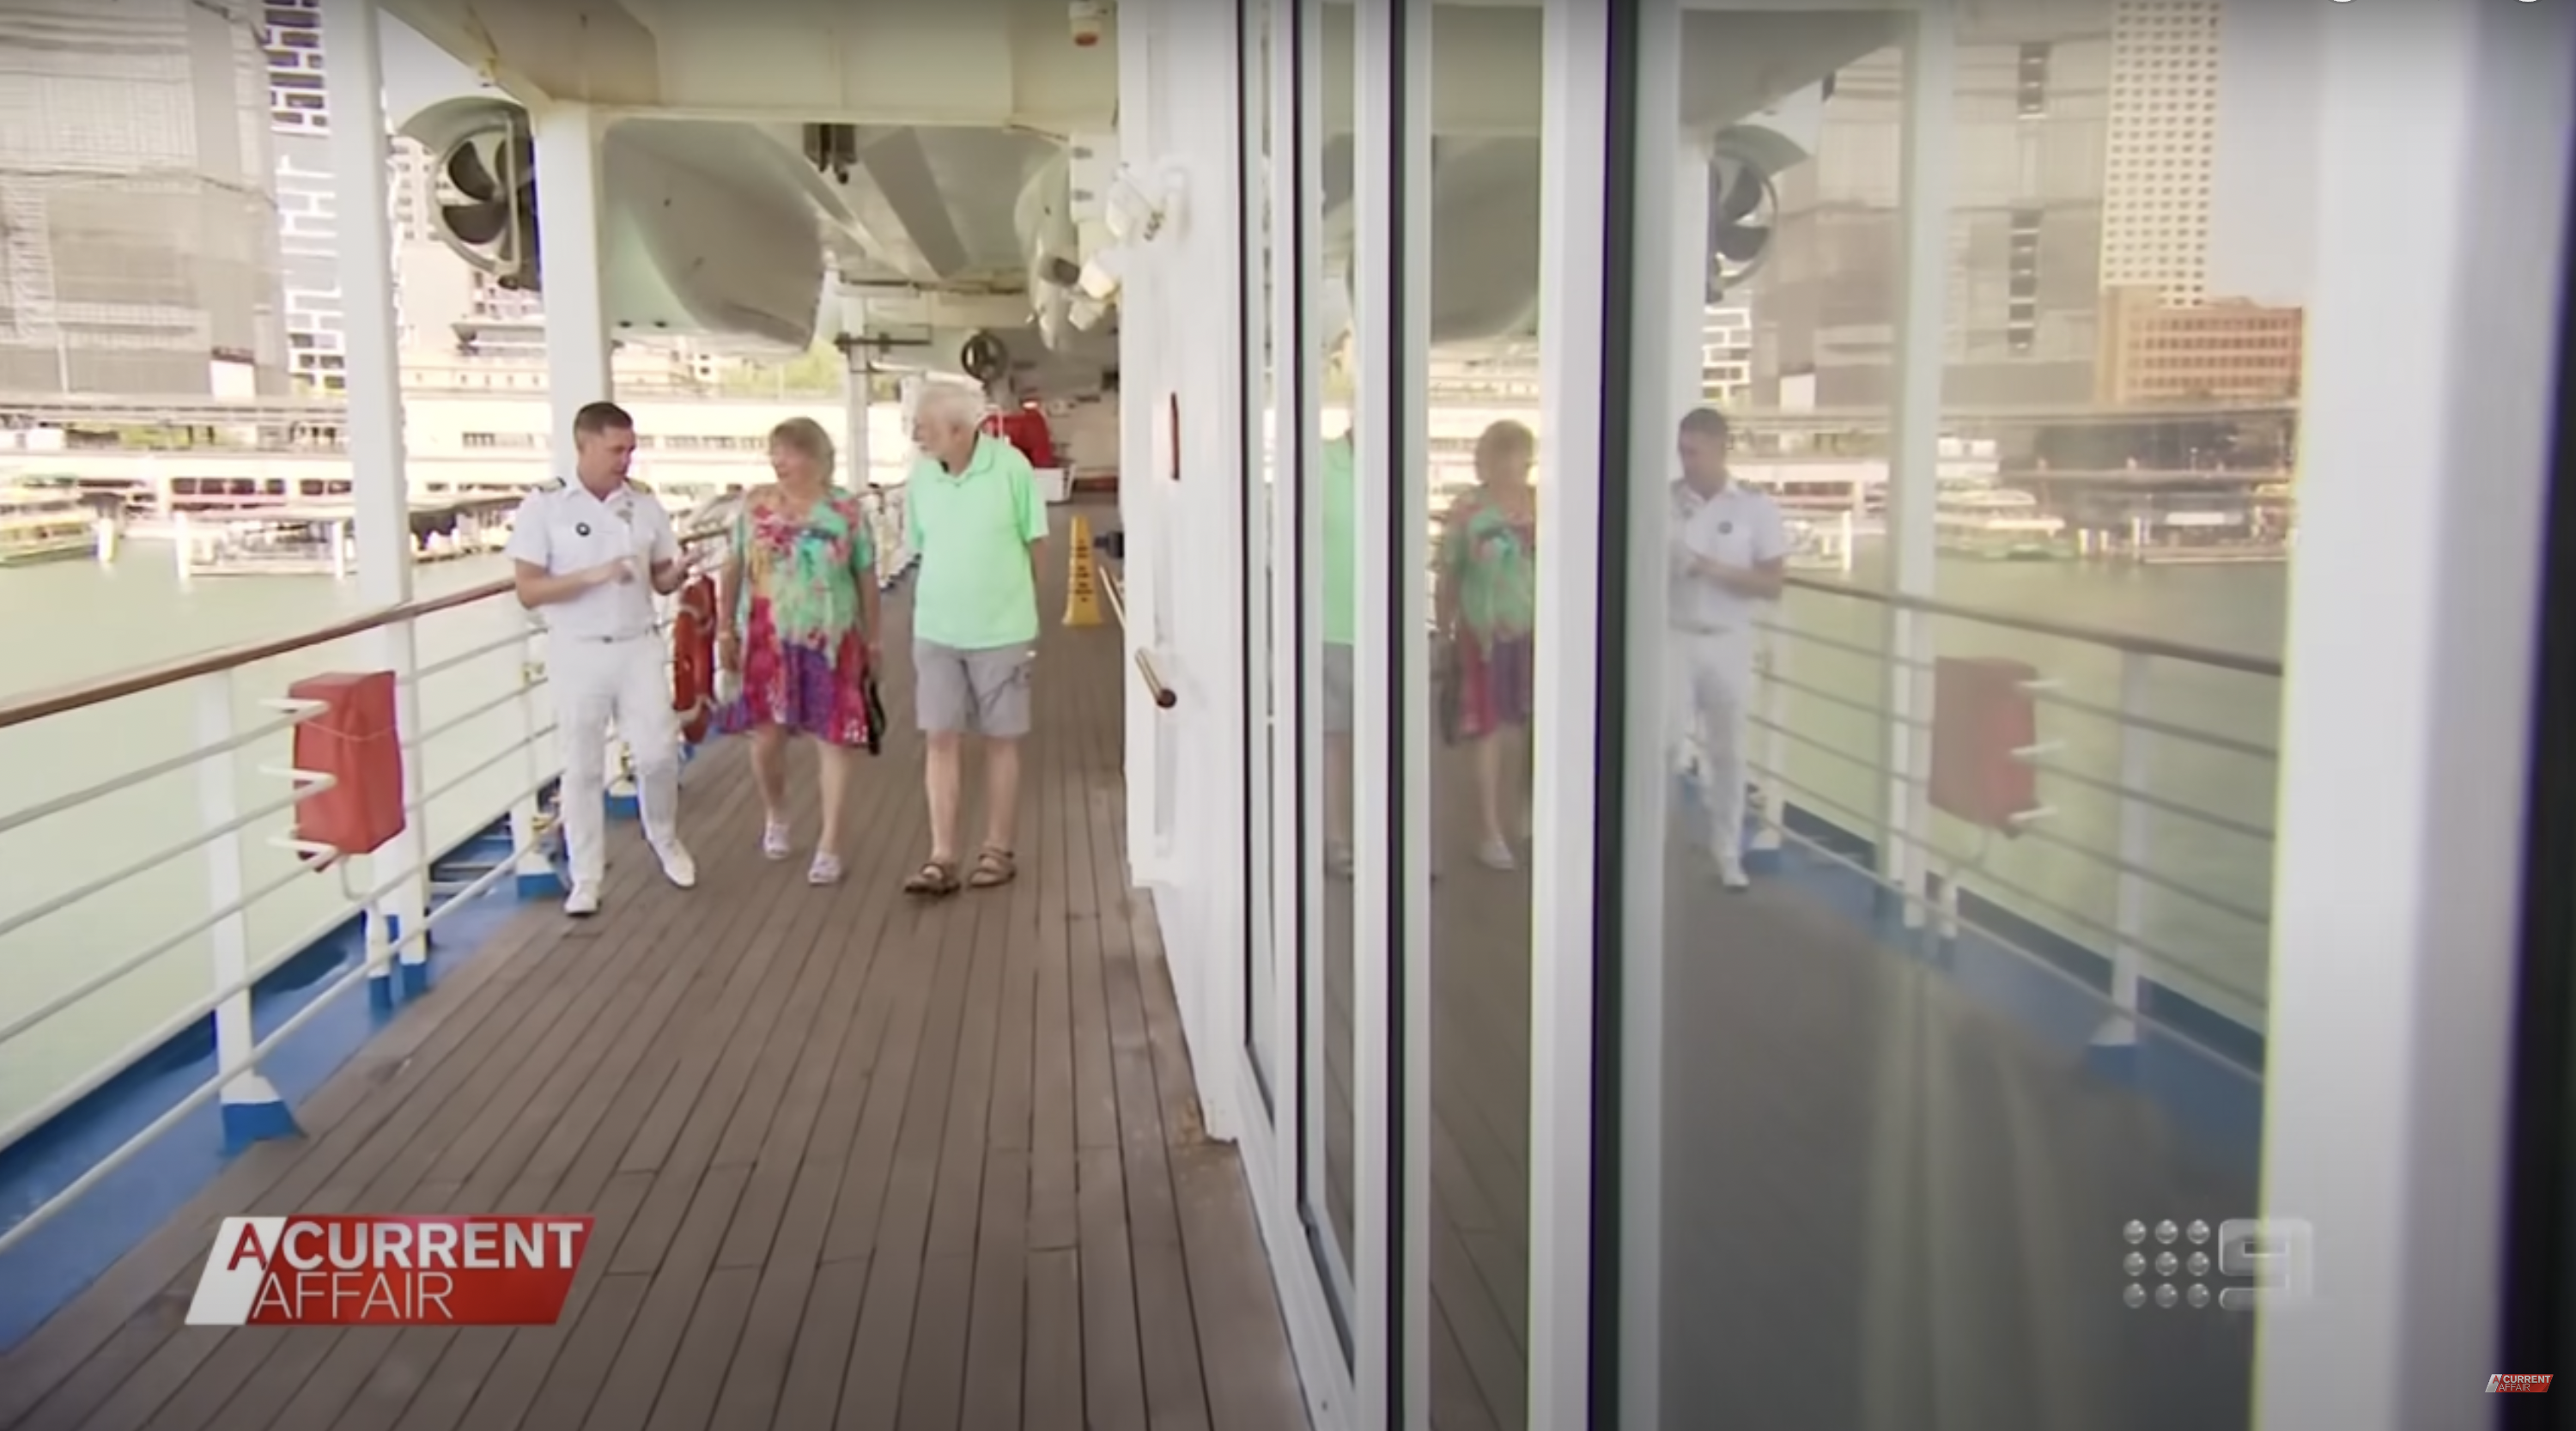 Marty and Jess Ansen on a cruise ship. | Source: YouTube/ACurrentAffair